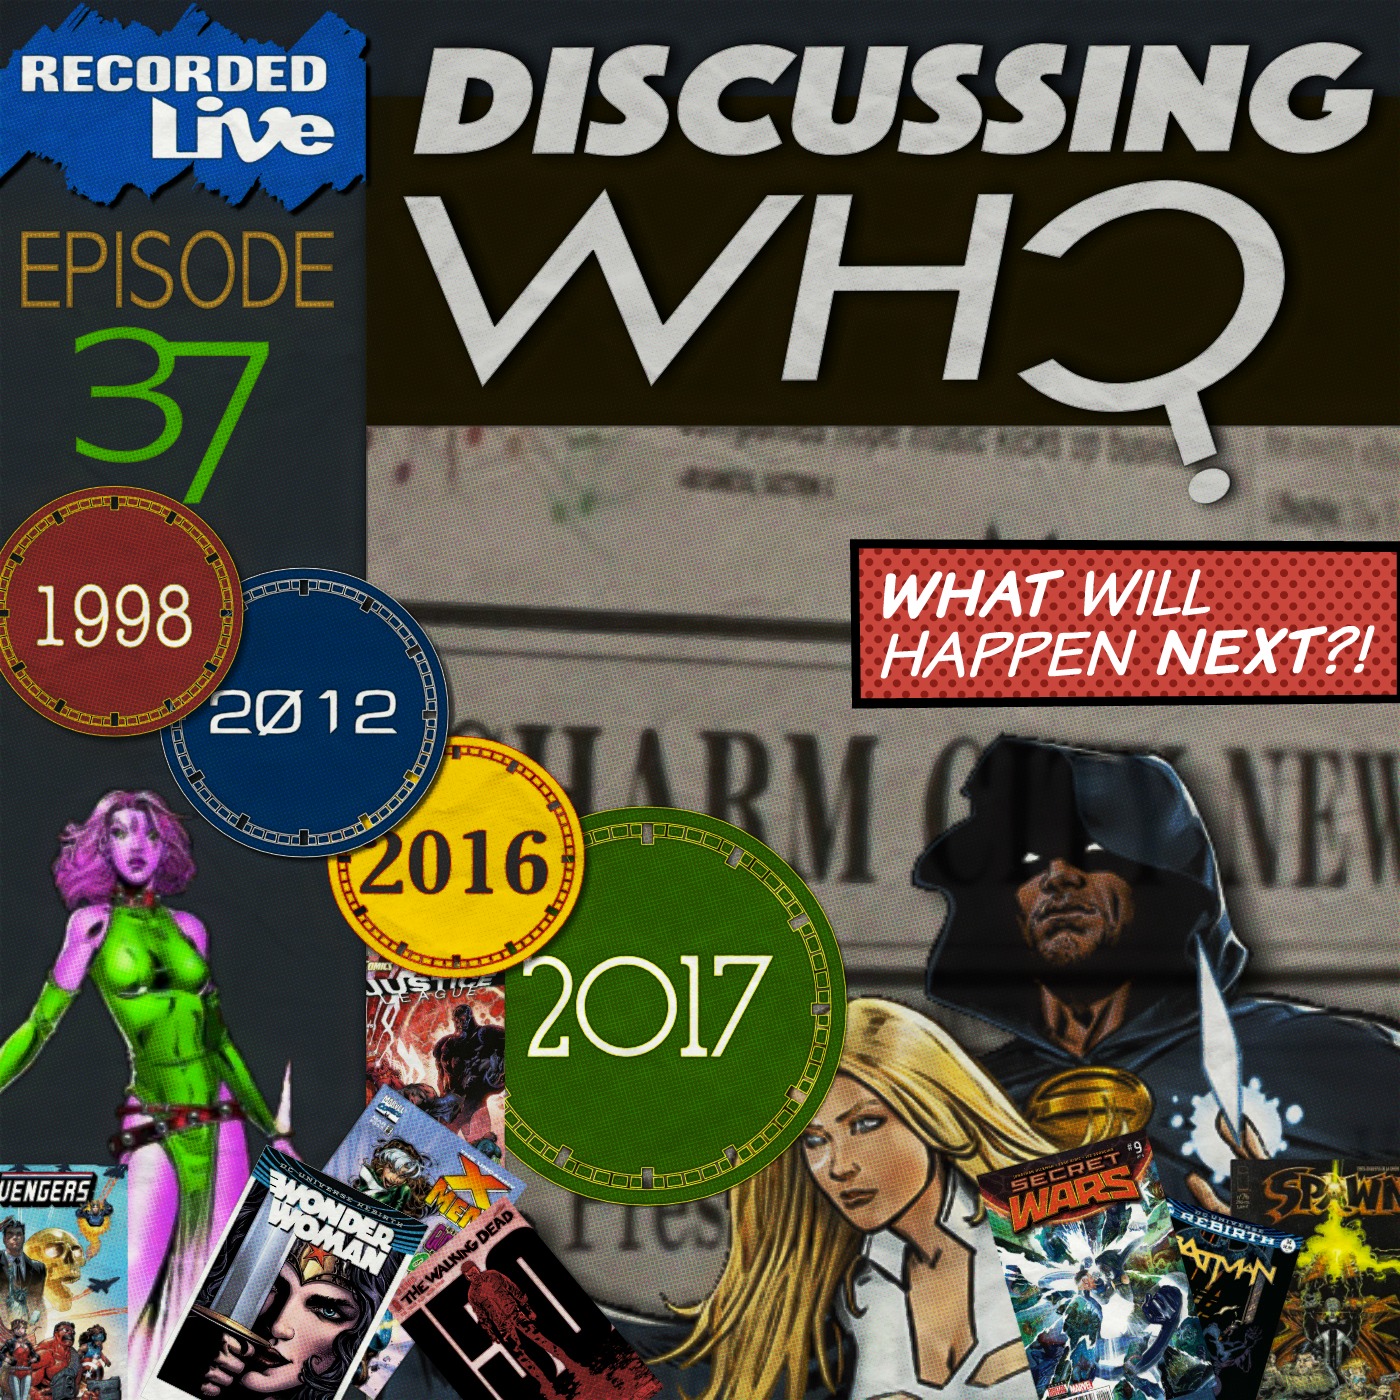 Discussing Who Episode 37